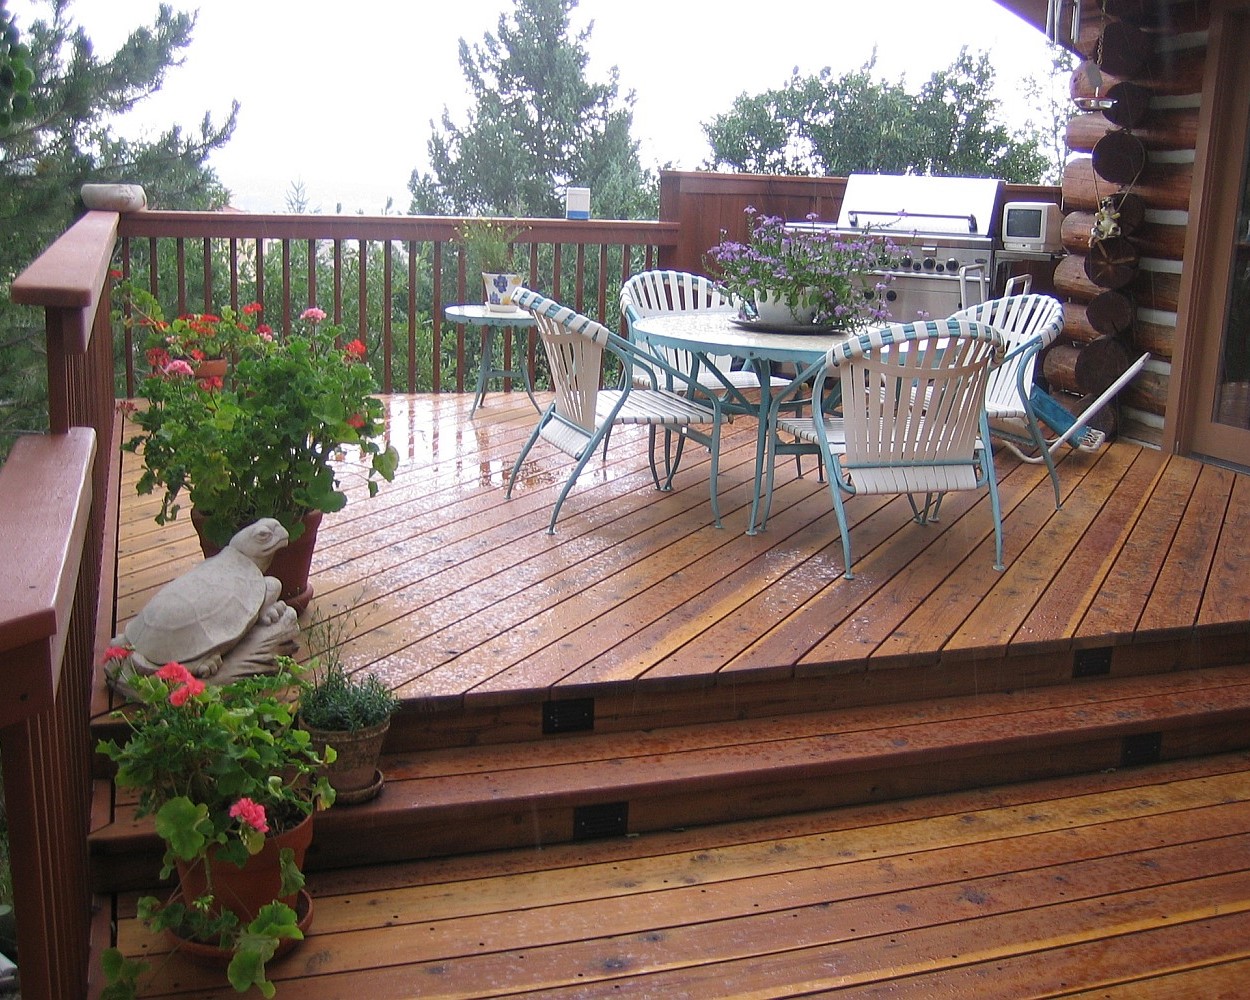 Redwood deck after it has been refinished with a Level 1 stain.